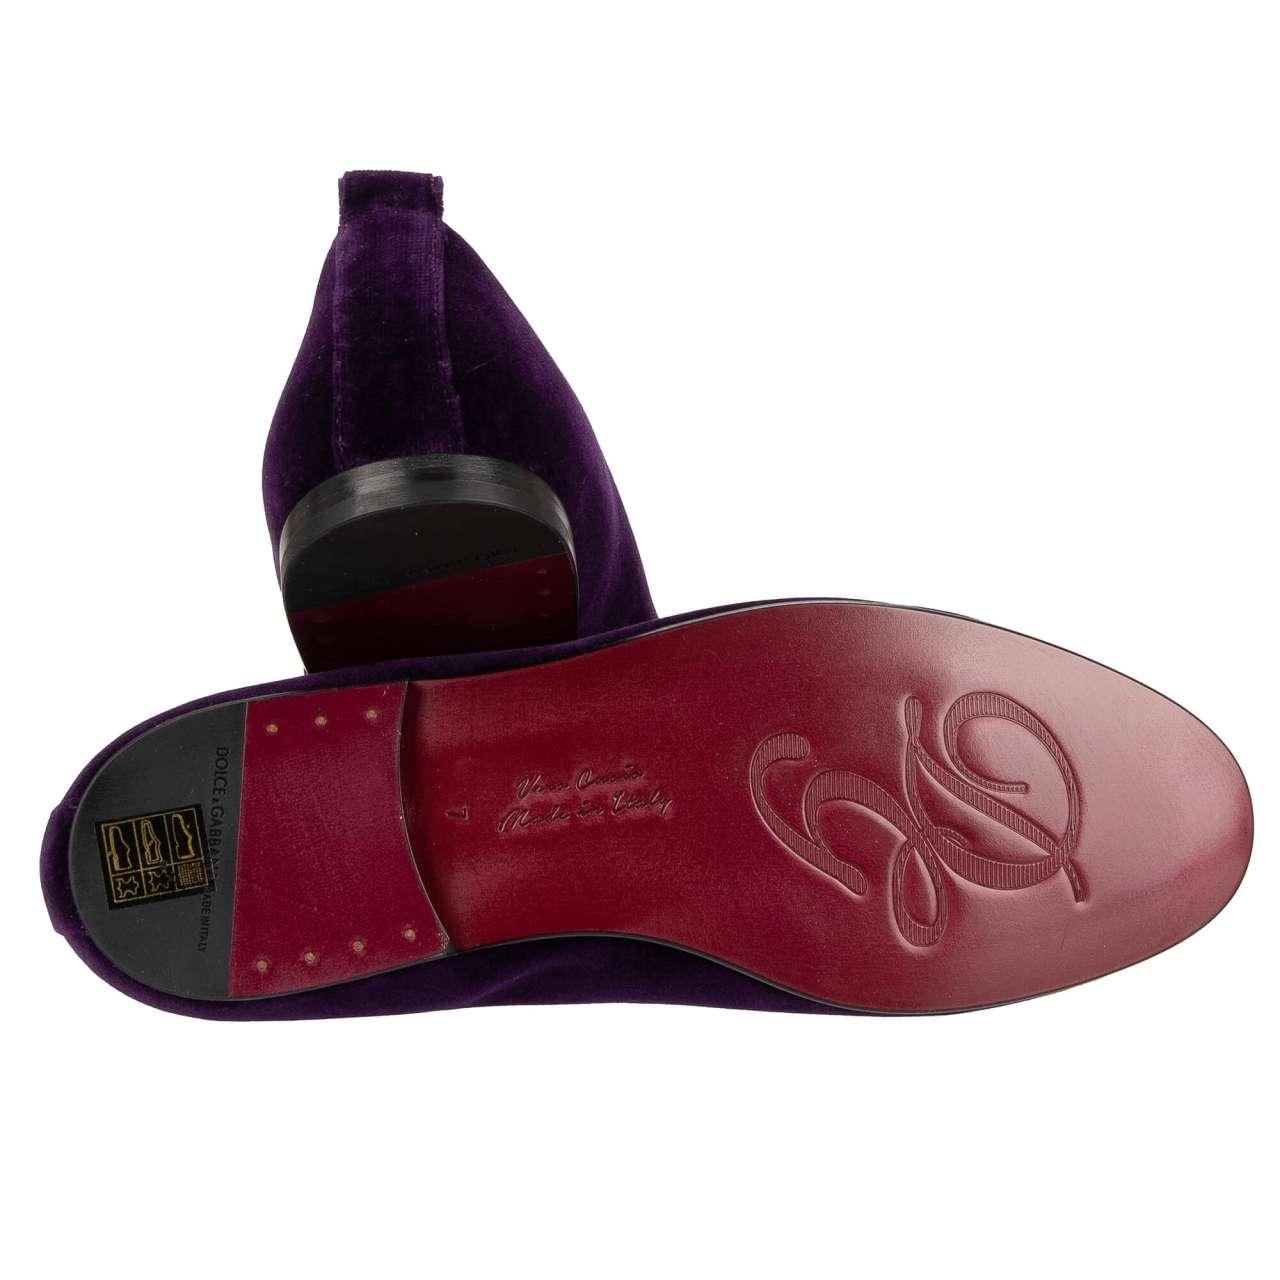 D&G - Heart Logo Embroidered Velvet Loafer YOUNG POPE Purple Red EUR 40 For Sale 3